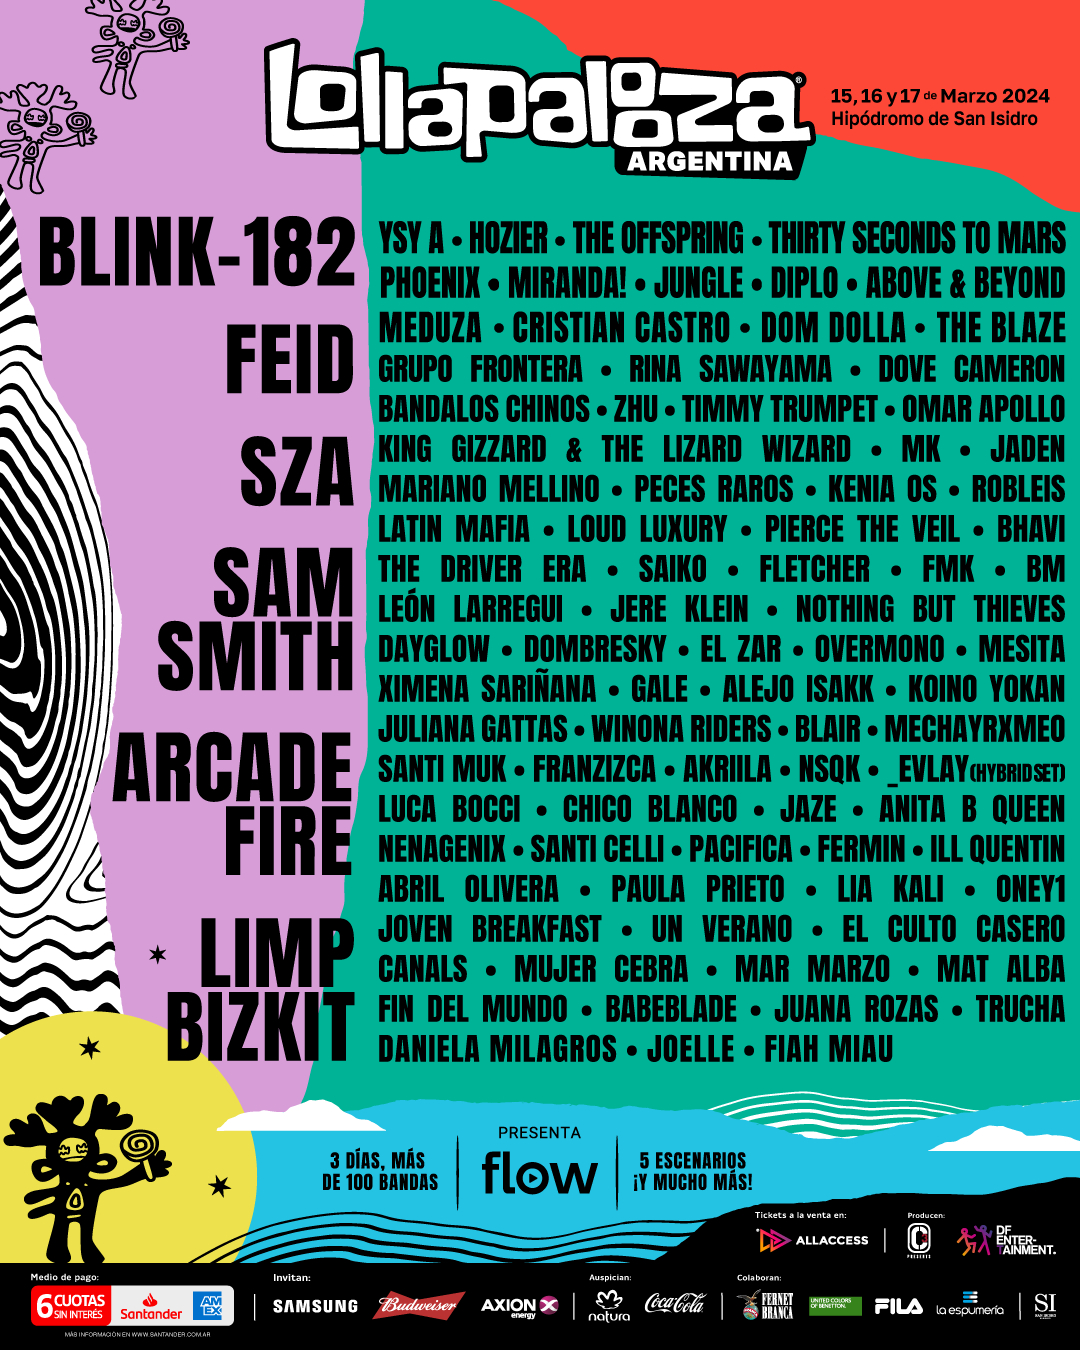 Blink-182, SZA, And Feid Are Among The Headliners For Lollapalooza’s 2024 Festival In Argentina